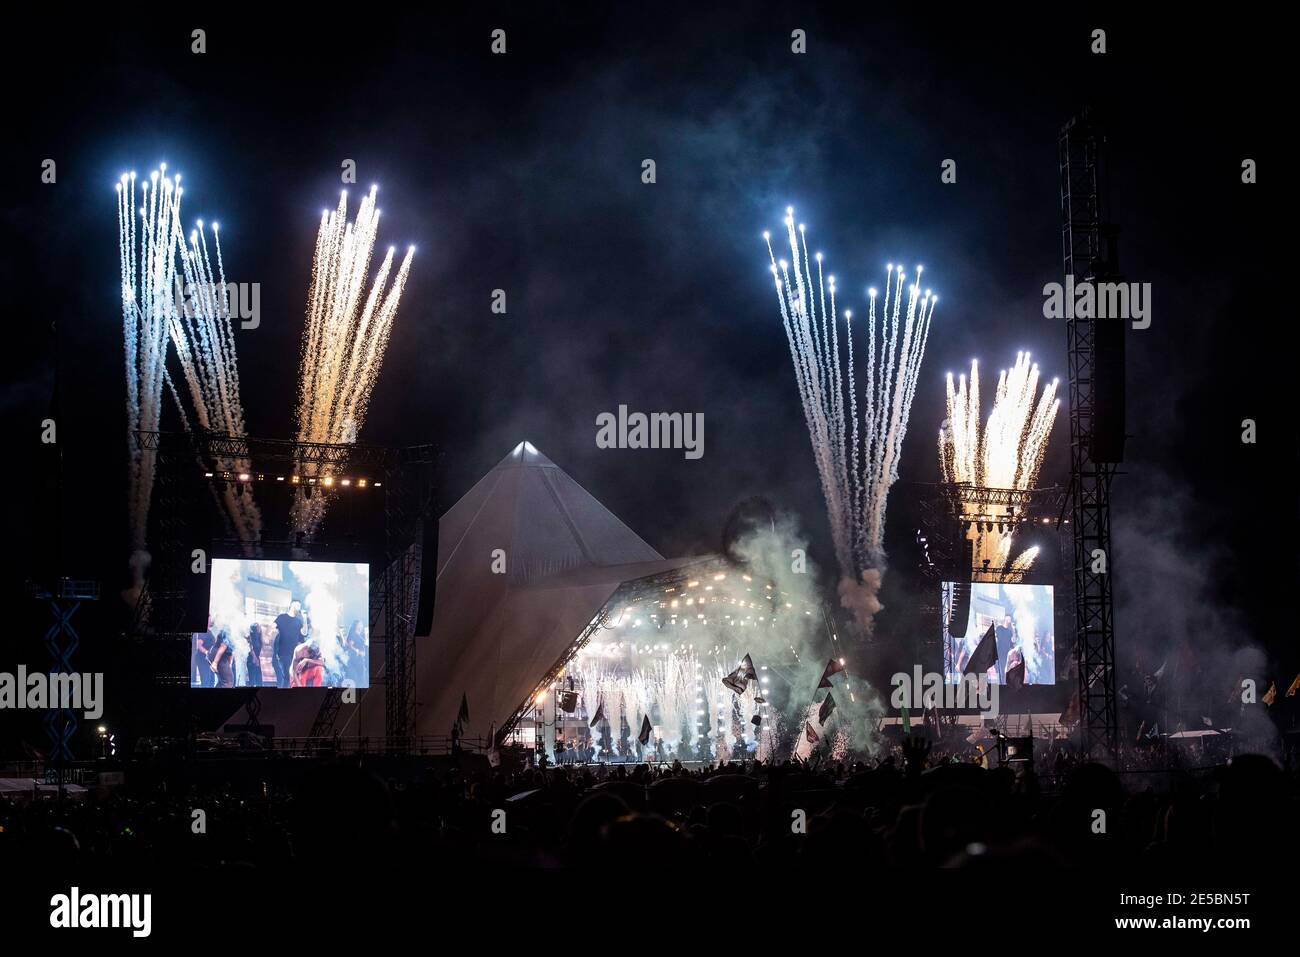 Fireworks launched above the Pyramid stage during Stormzy's set at Glastonbury 2019 Stock Photo